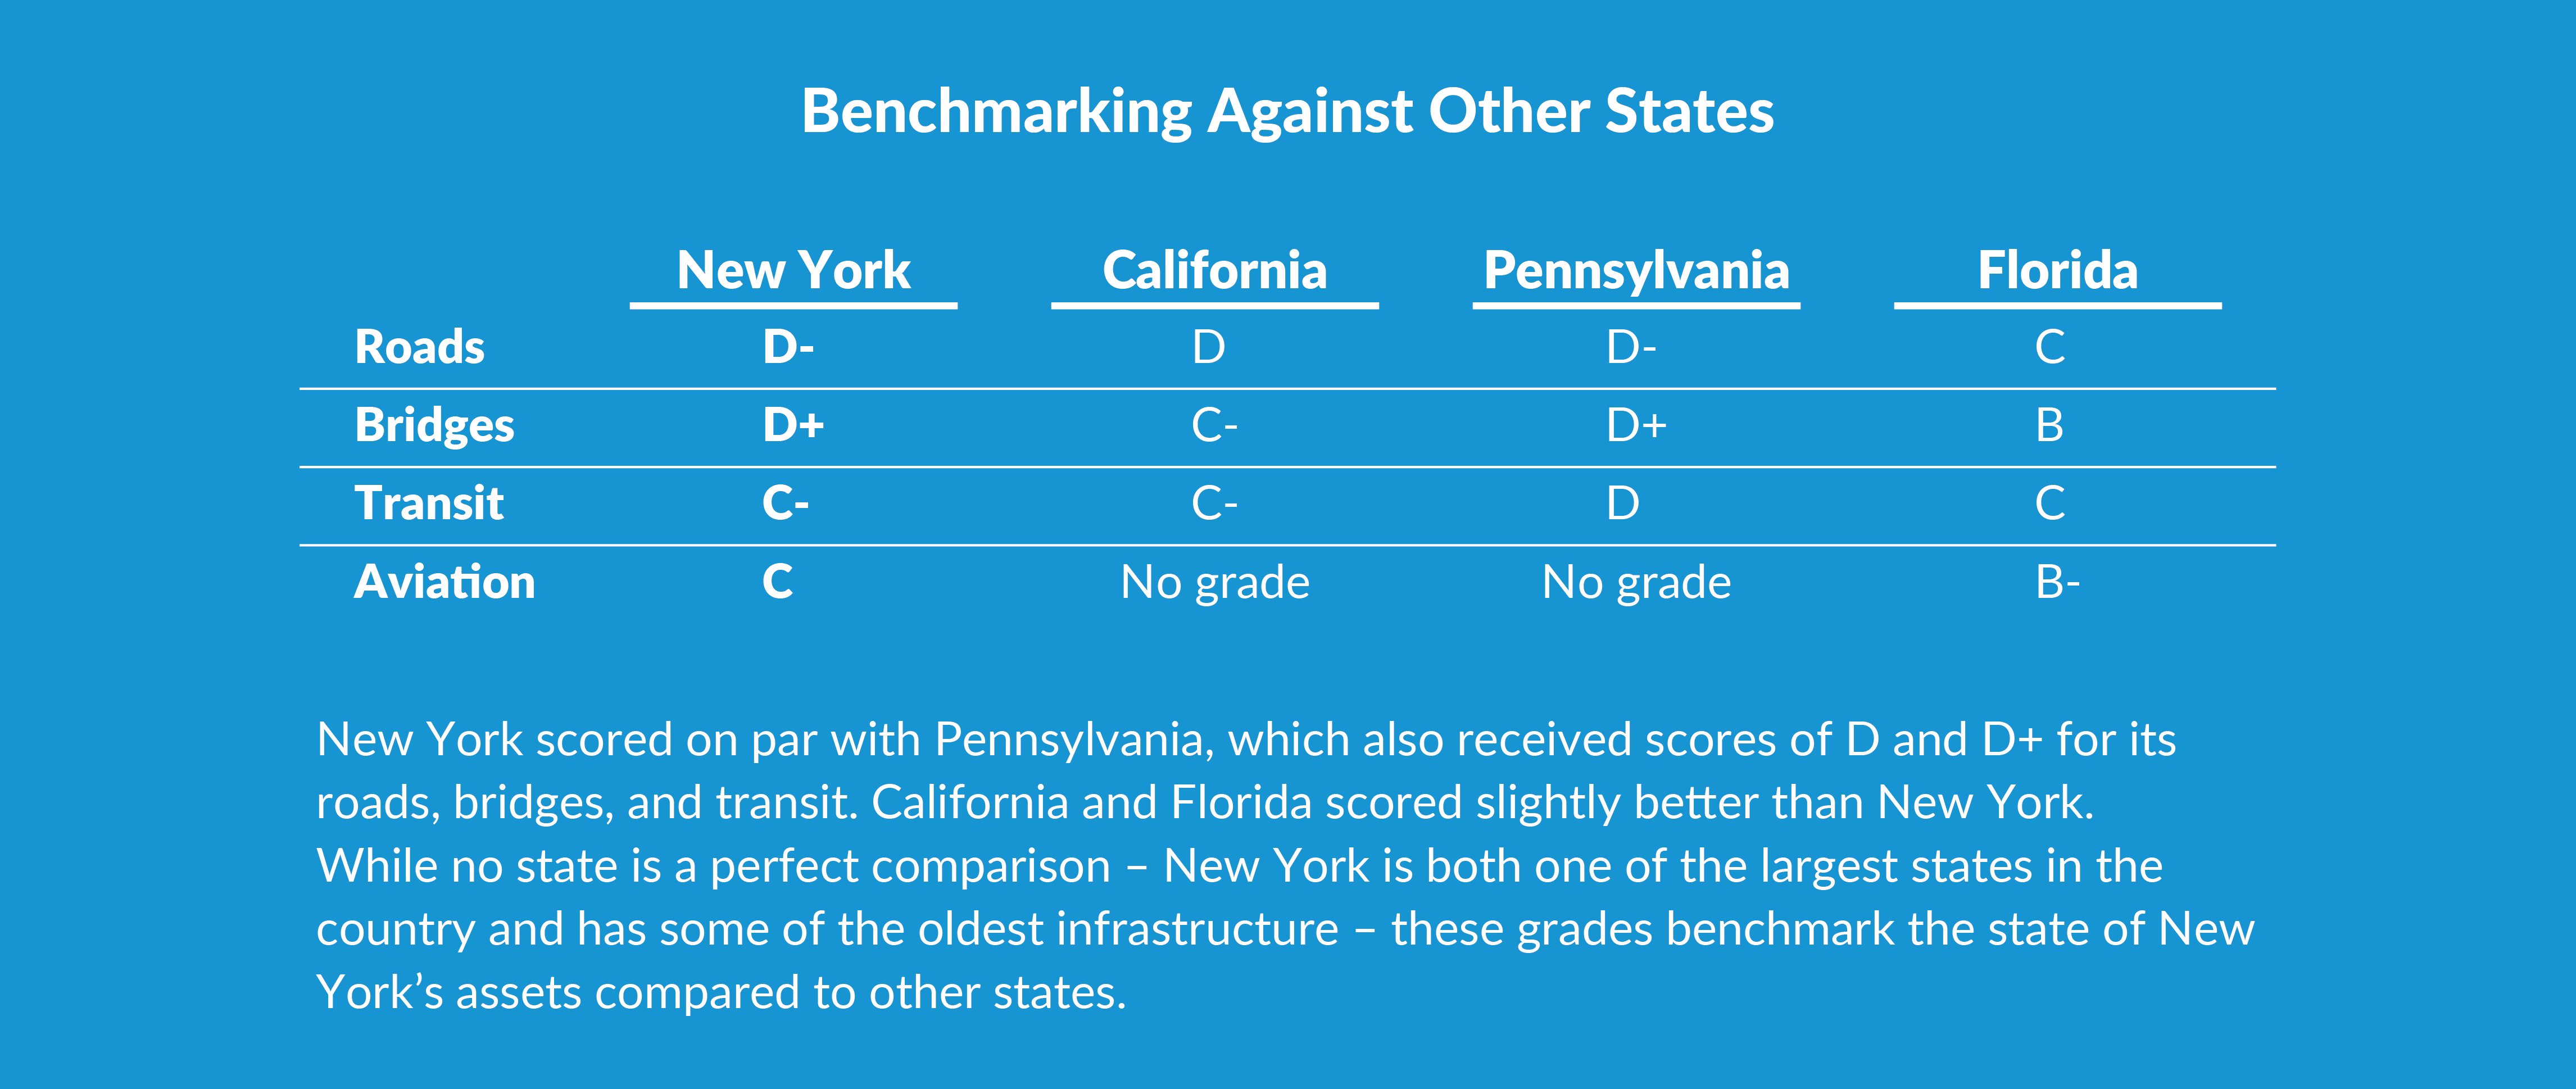 BENCHMARKING AGAINST OTHER STATES 